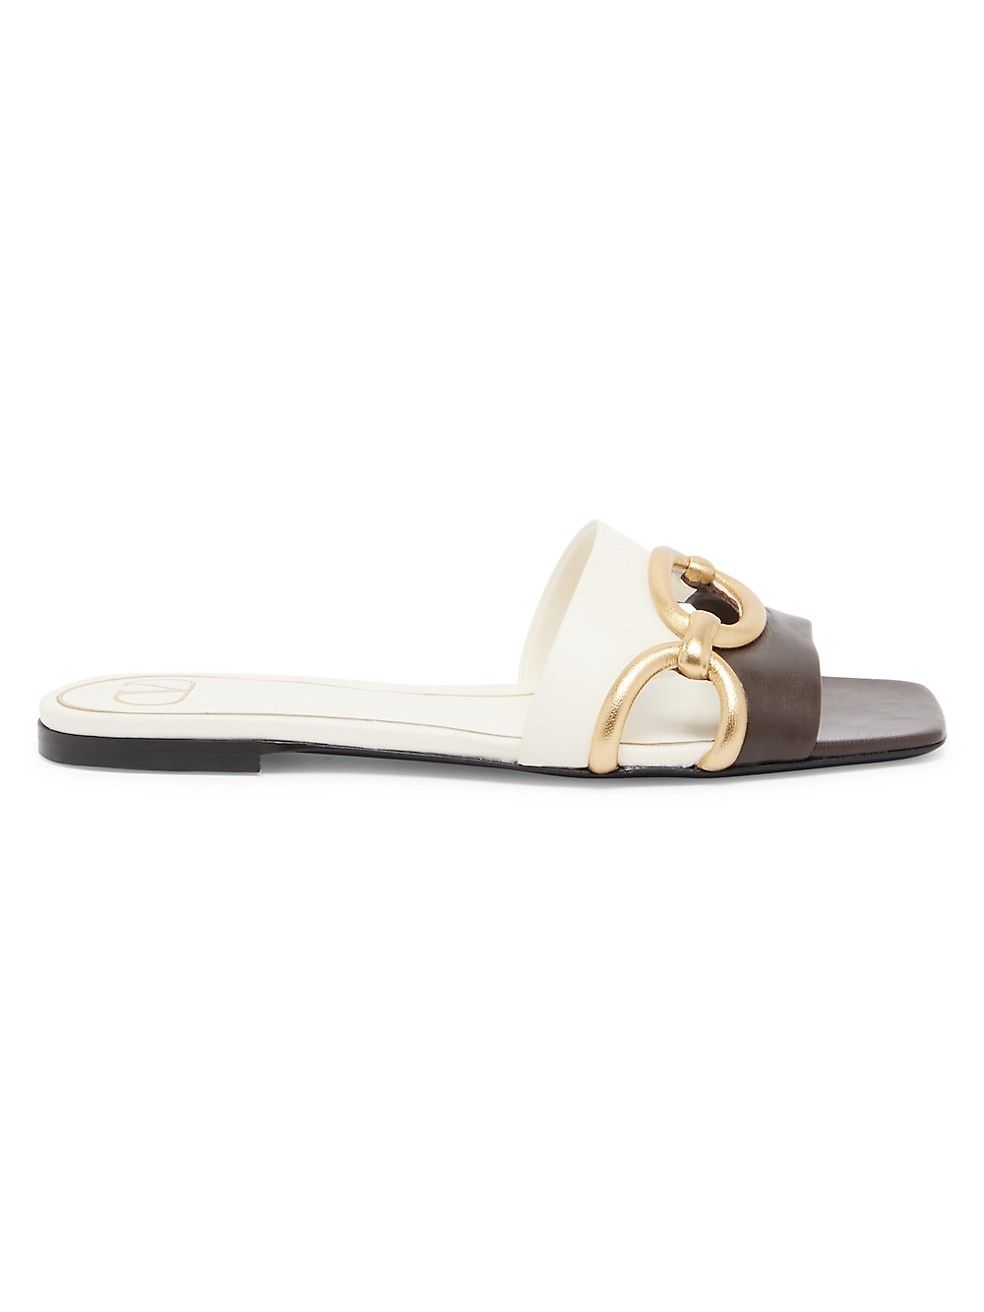 Chain-Link Colorblocked Leather Slide Sandals | Saks Fifth Avenue